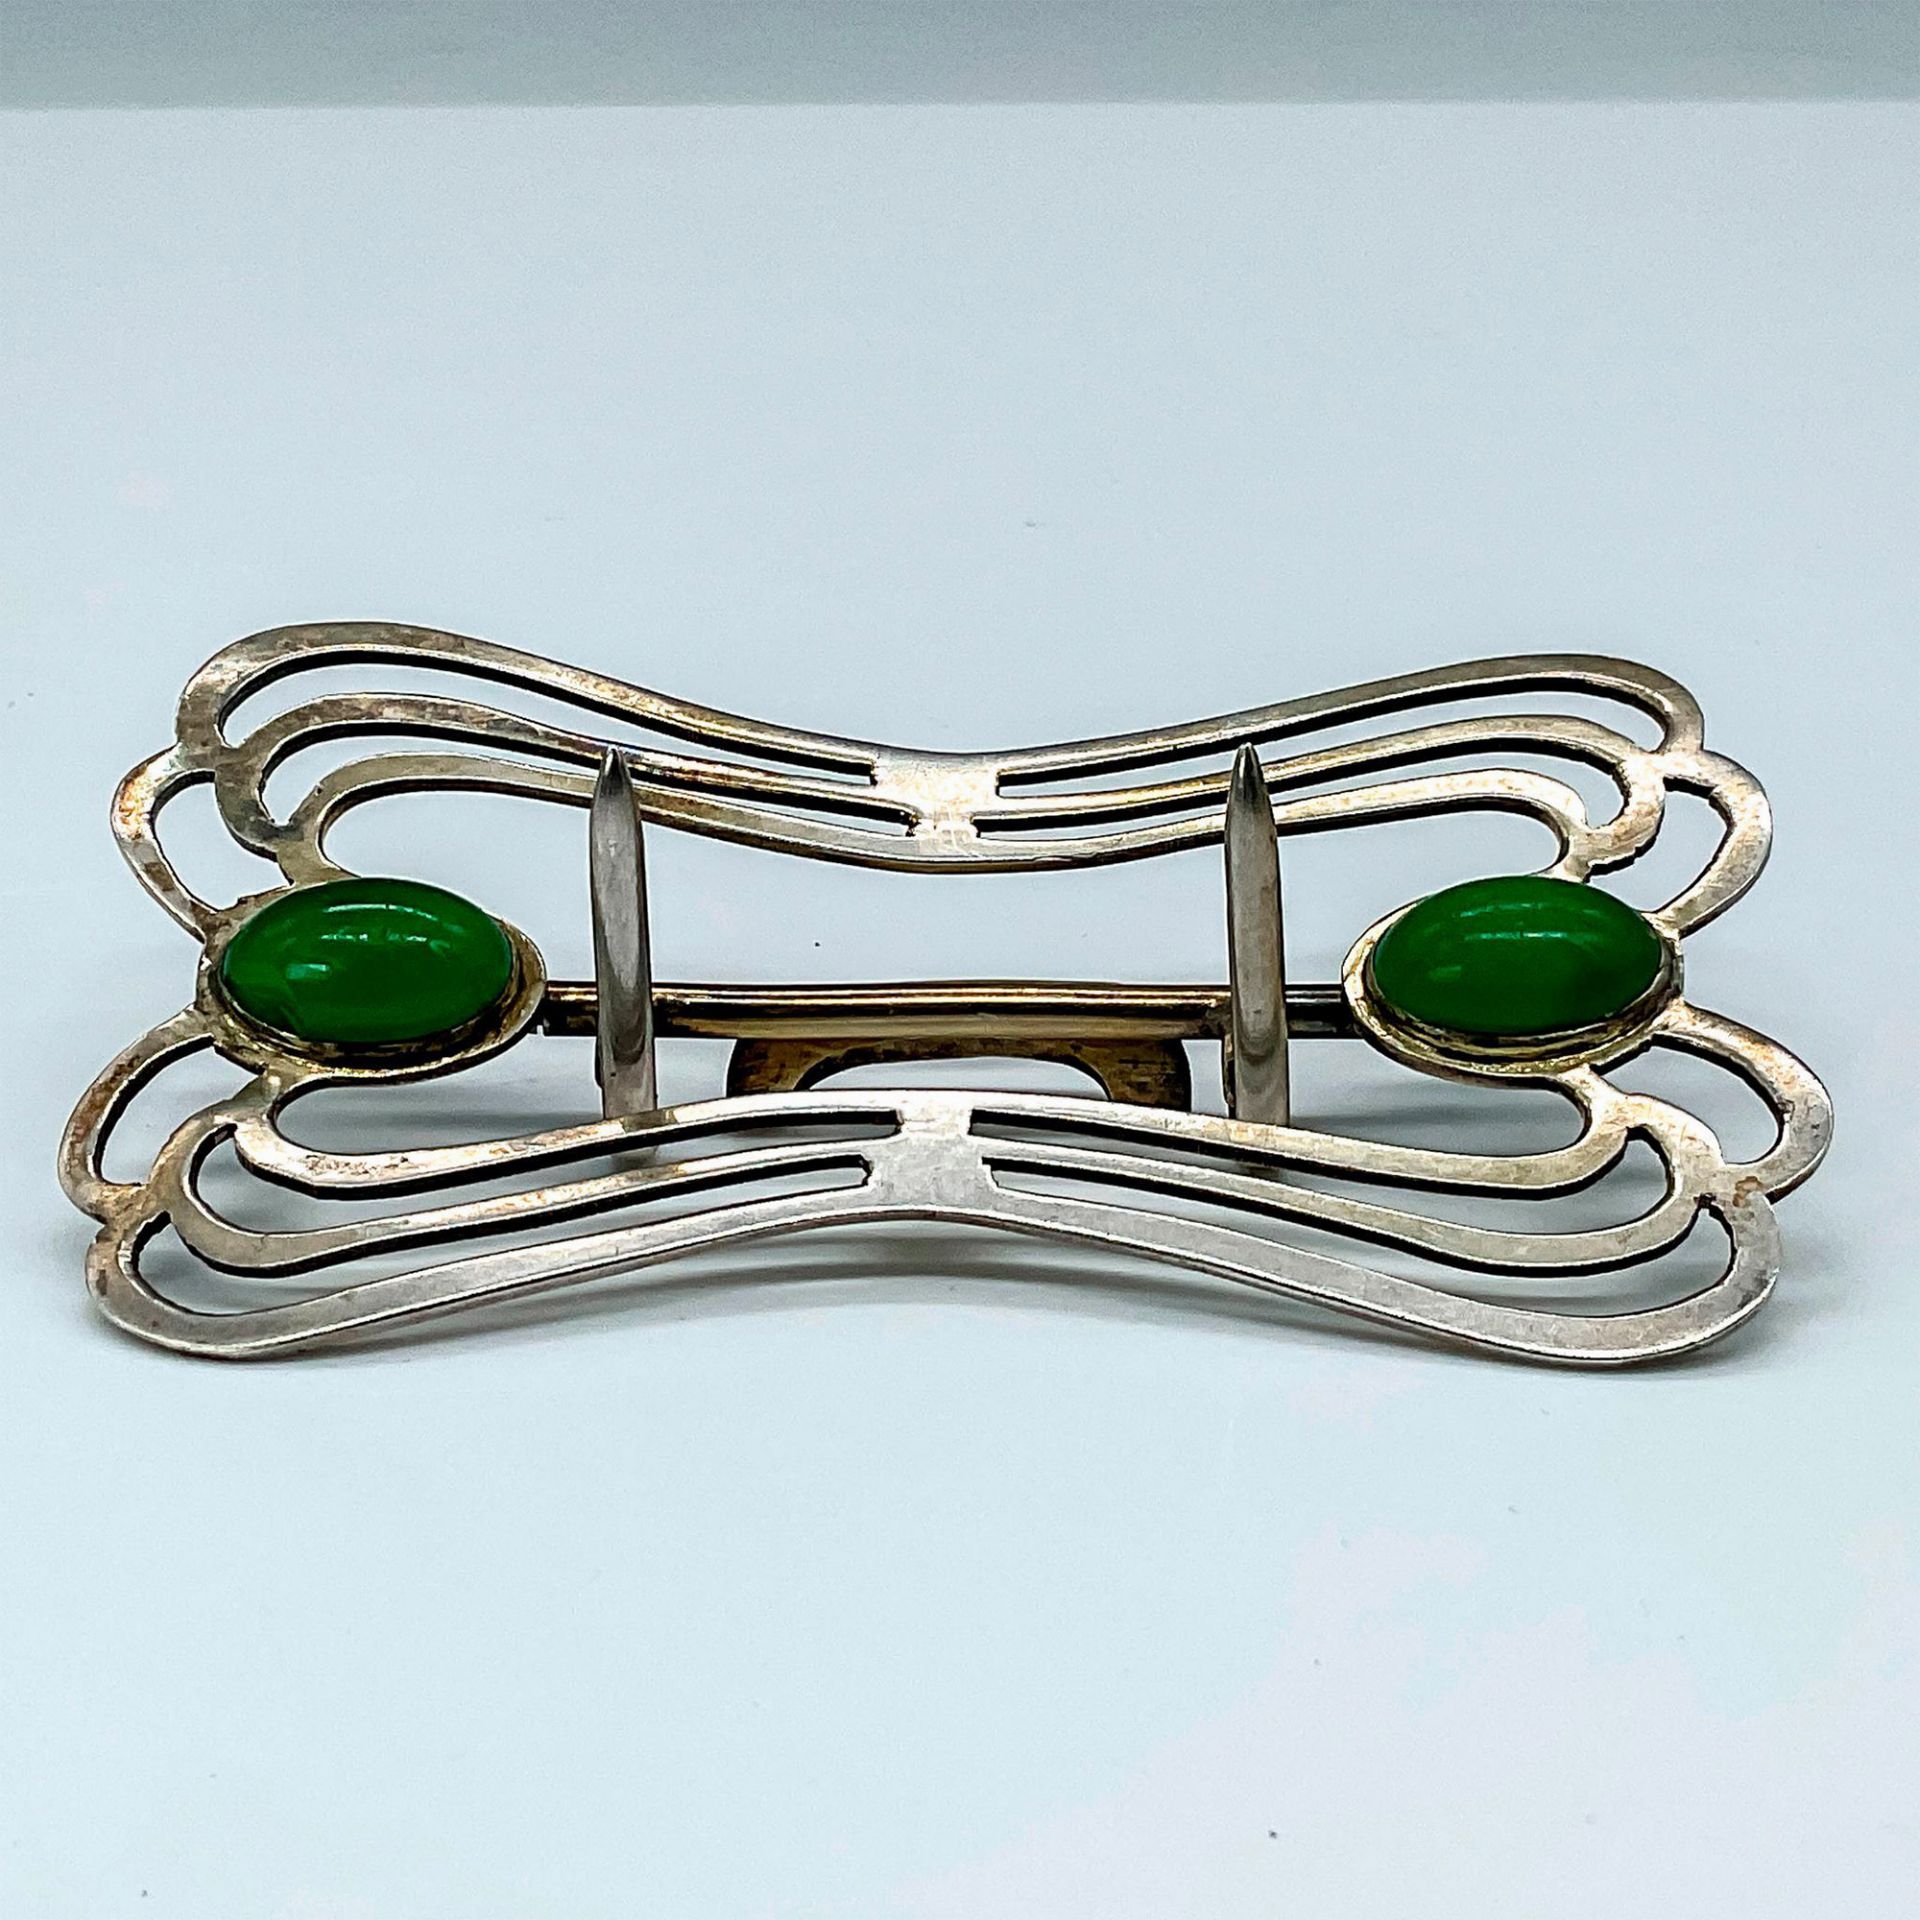 Antique Sterling Silver Belt Buckle with Green Stones - Image 3 of 3